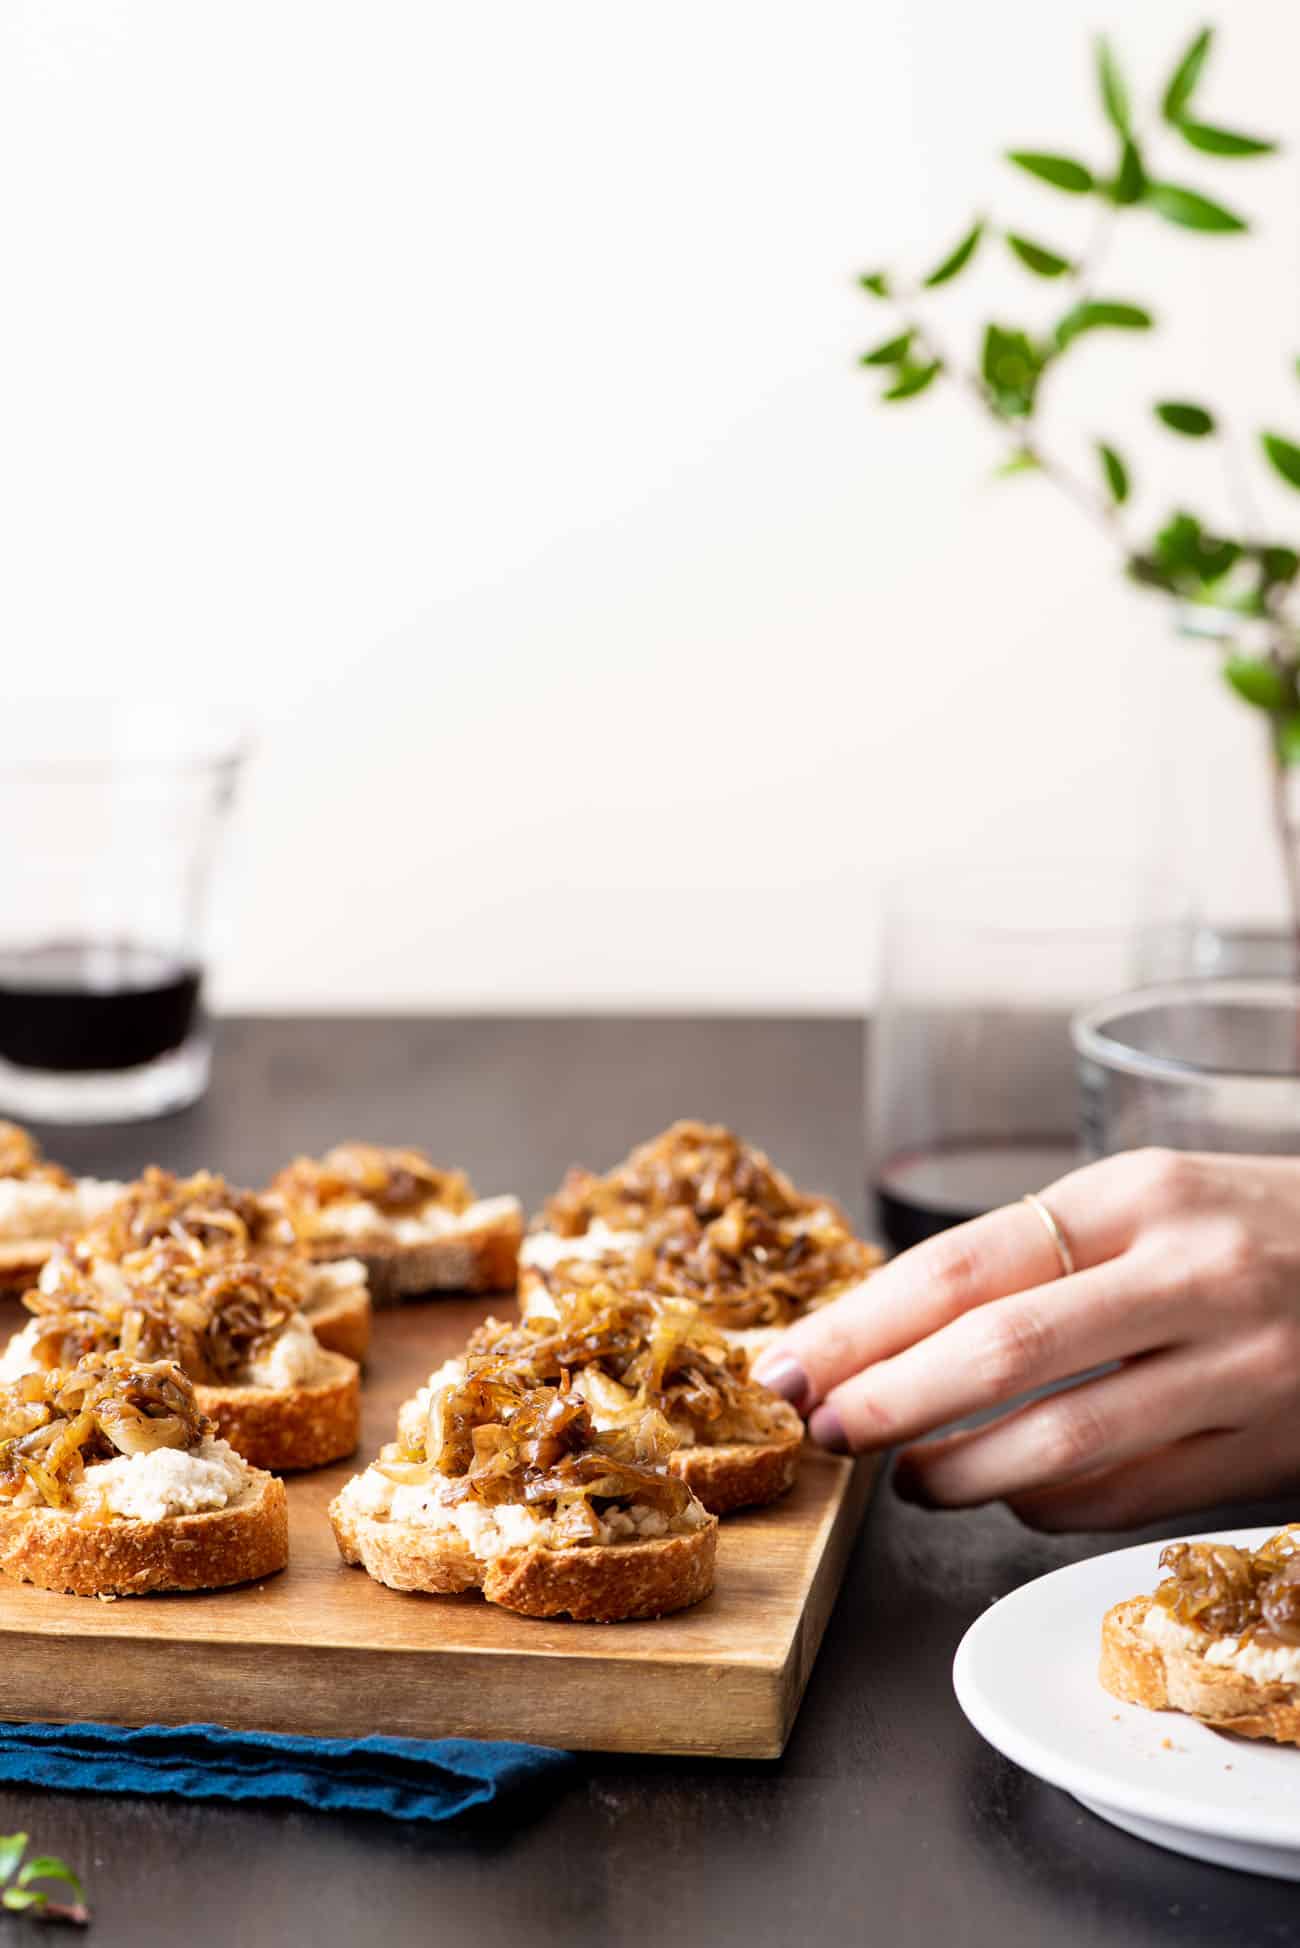 Woman's hand reaching for caramelized onion crostini with vegan cashew cheese.